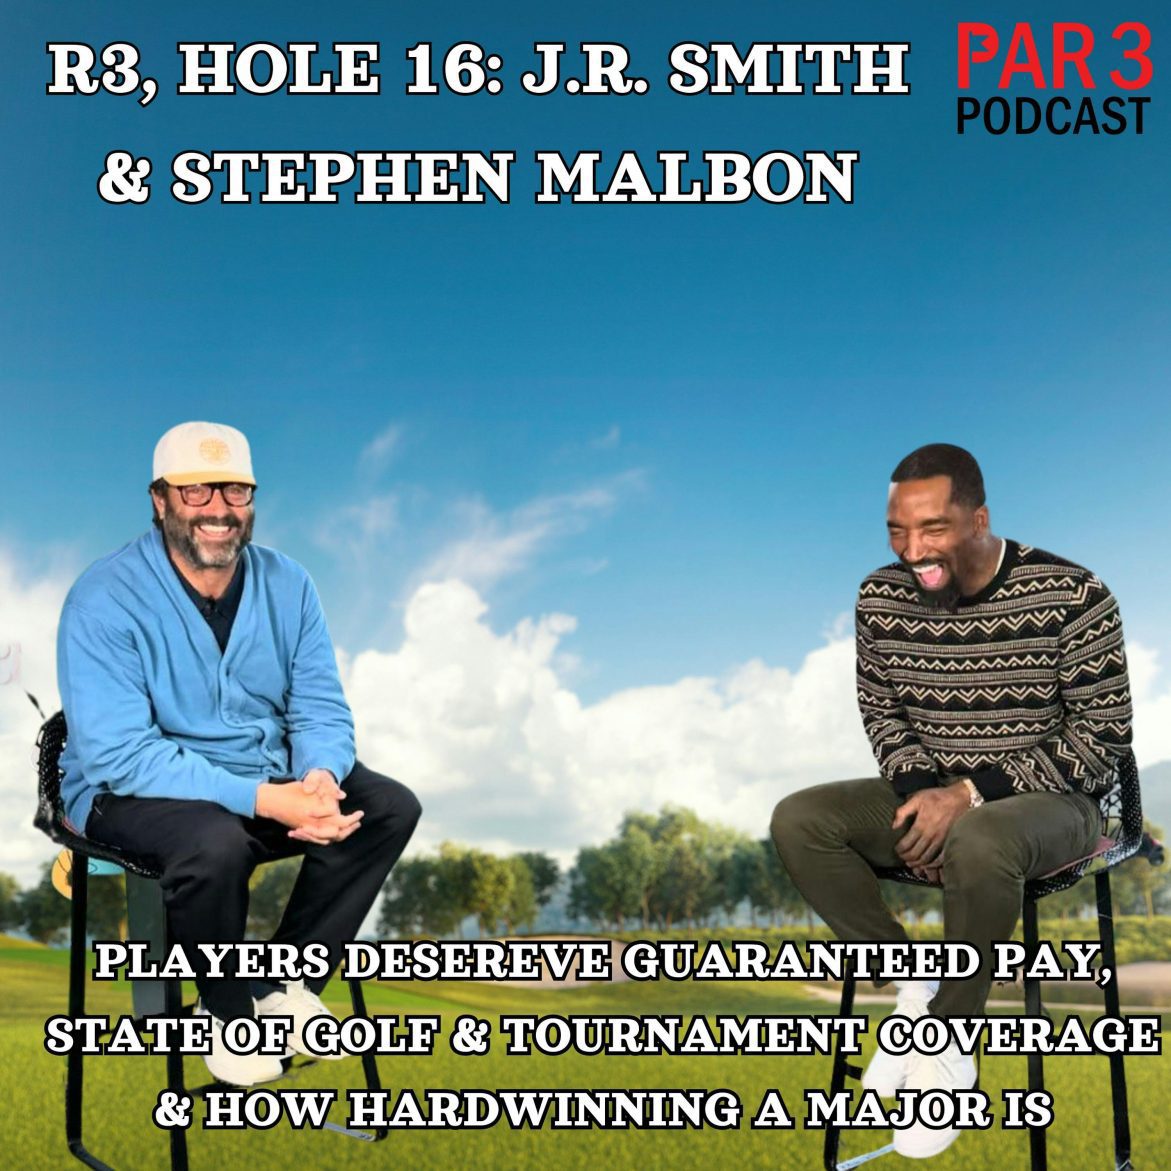 Black Podcasting - R3, HOLE 16: J.R. Smith & Stephen Malbon on PGA Tour Players Deserve Guaranteed Pay, State of Golf & Tournament Coverage, How Hard Winning A Major Is